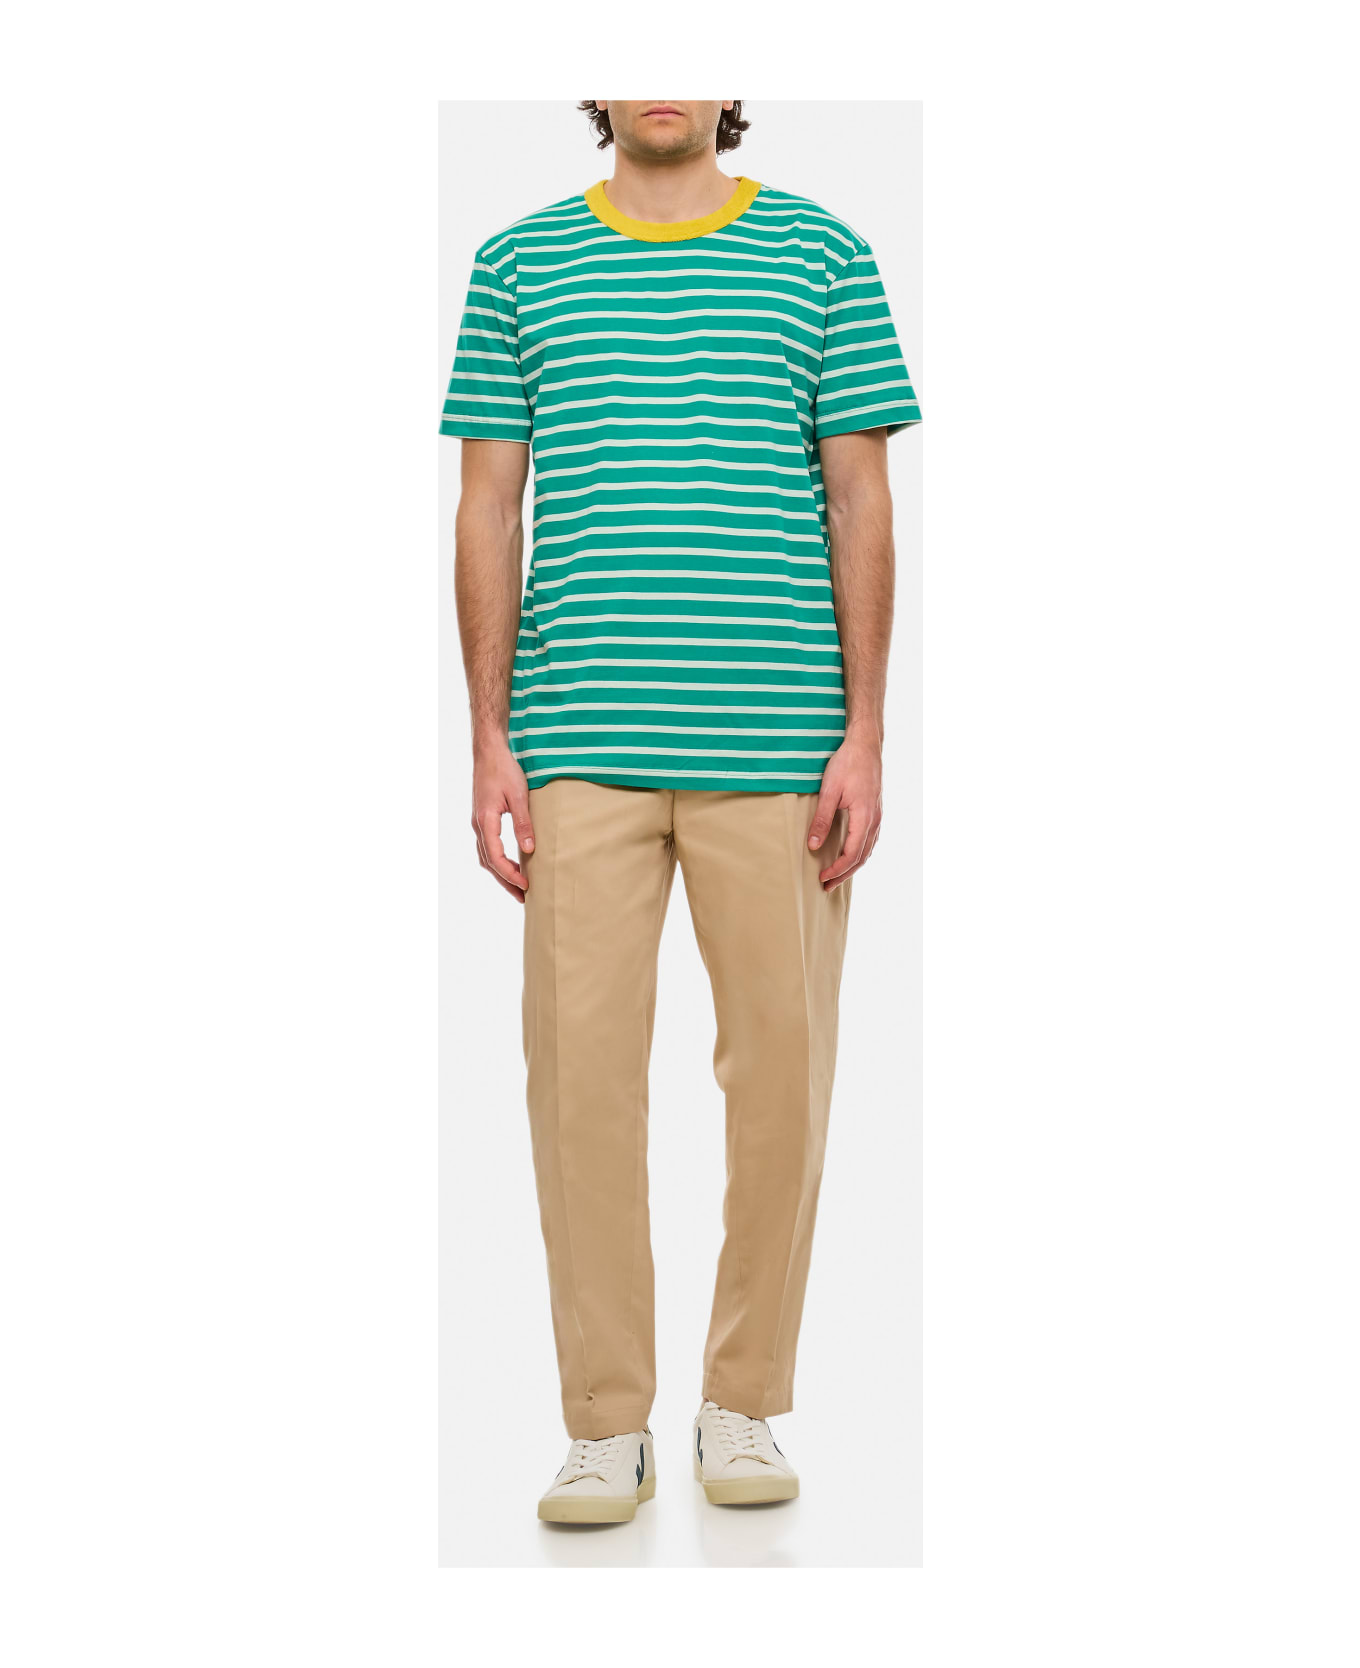 Howlin T-shirt A Righe In Cotone - Green シャツ